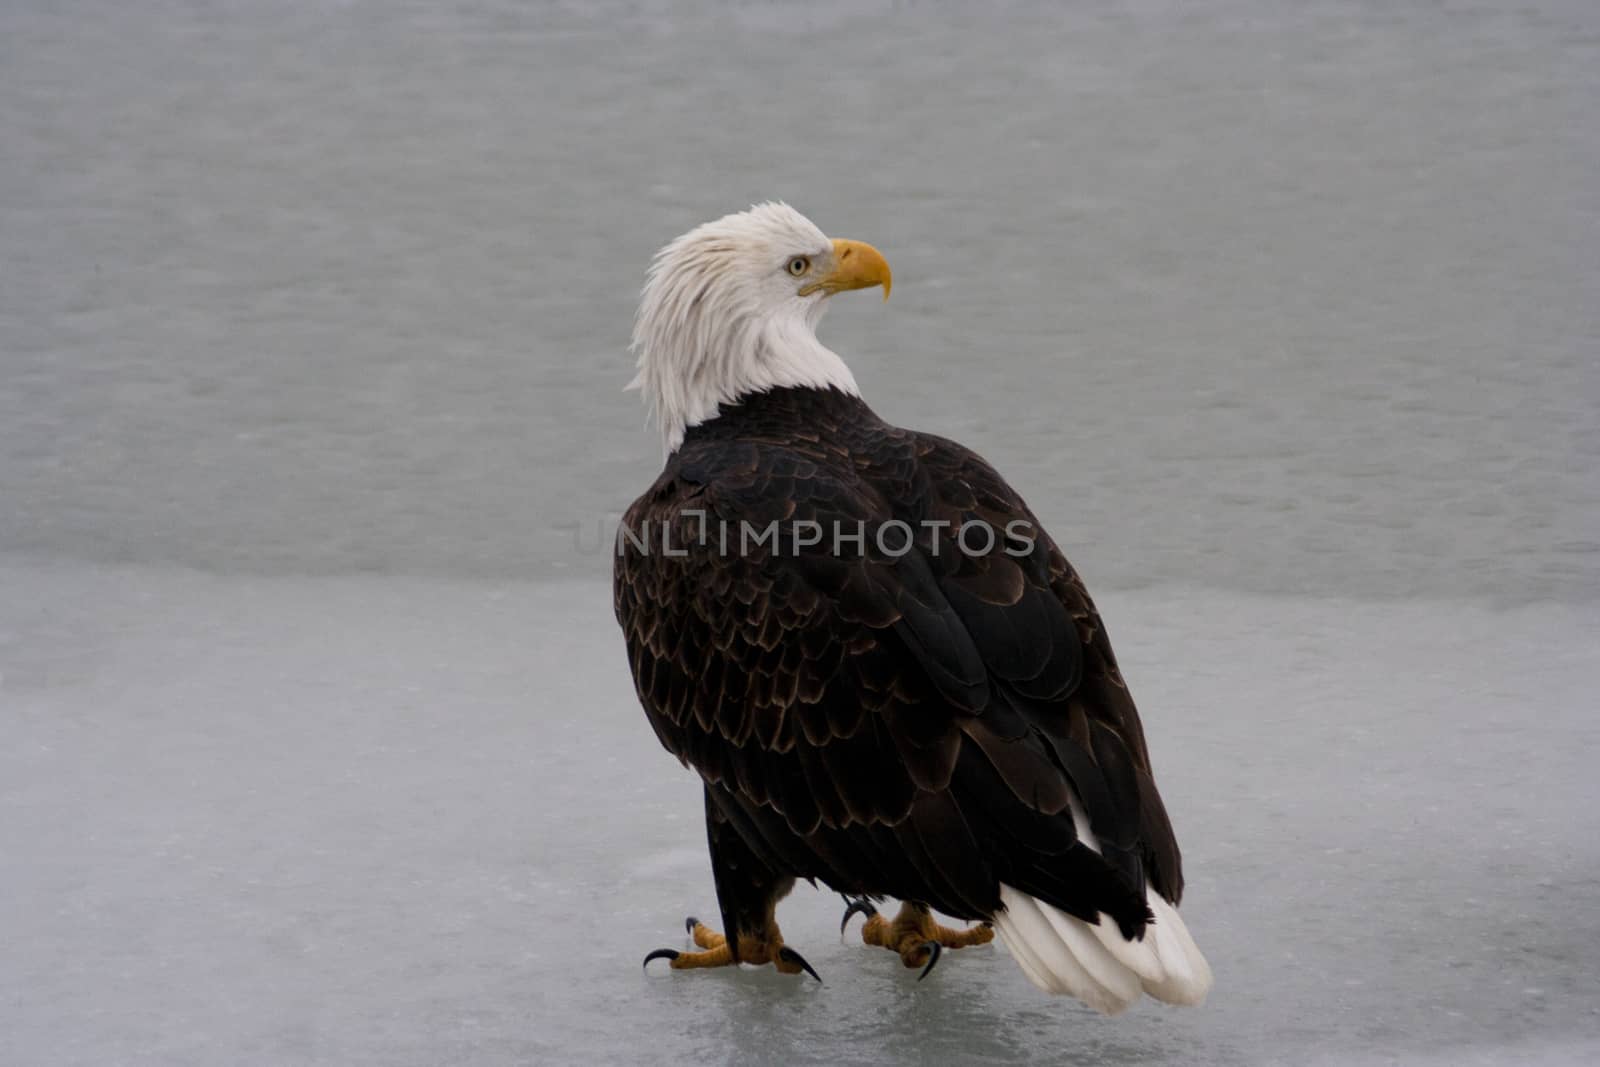 American bald eagle stands, turning its head, on the frozen Chilkat River in Haines, Alaska, USA.  Location is at the Chilkat Bald Eagle Preserve established to protect the world's largest concentration of Bald Eagles, America's national bird. Classic white head and tail of mature bald eagle is visible. 